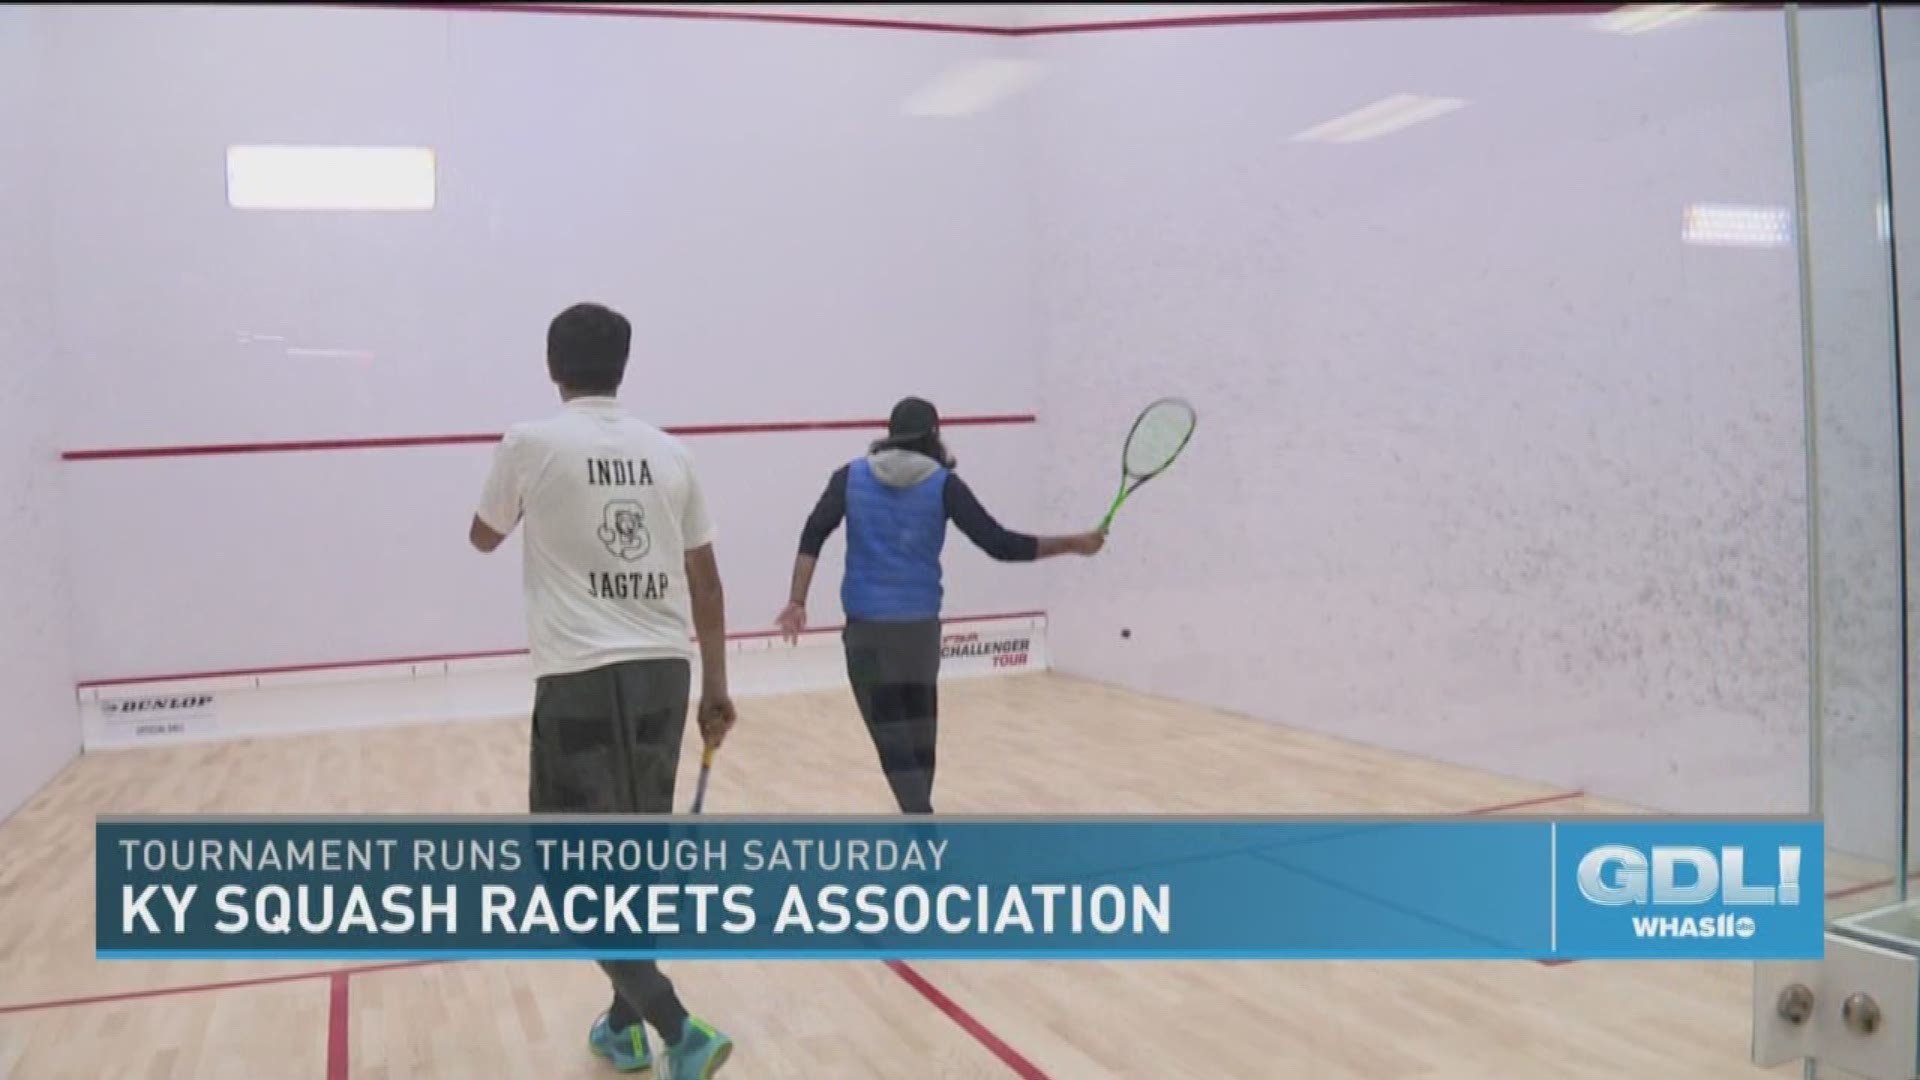 Pro-athletes from all over the world are in town to compete in Louisville's largest ever professional squash tournament.